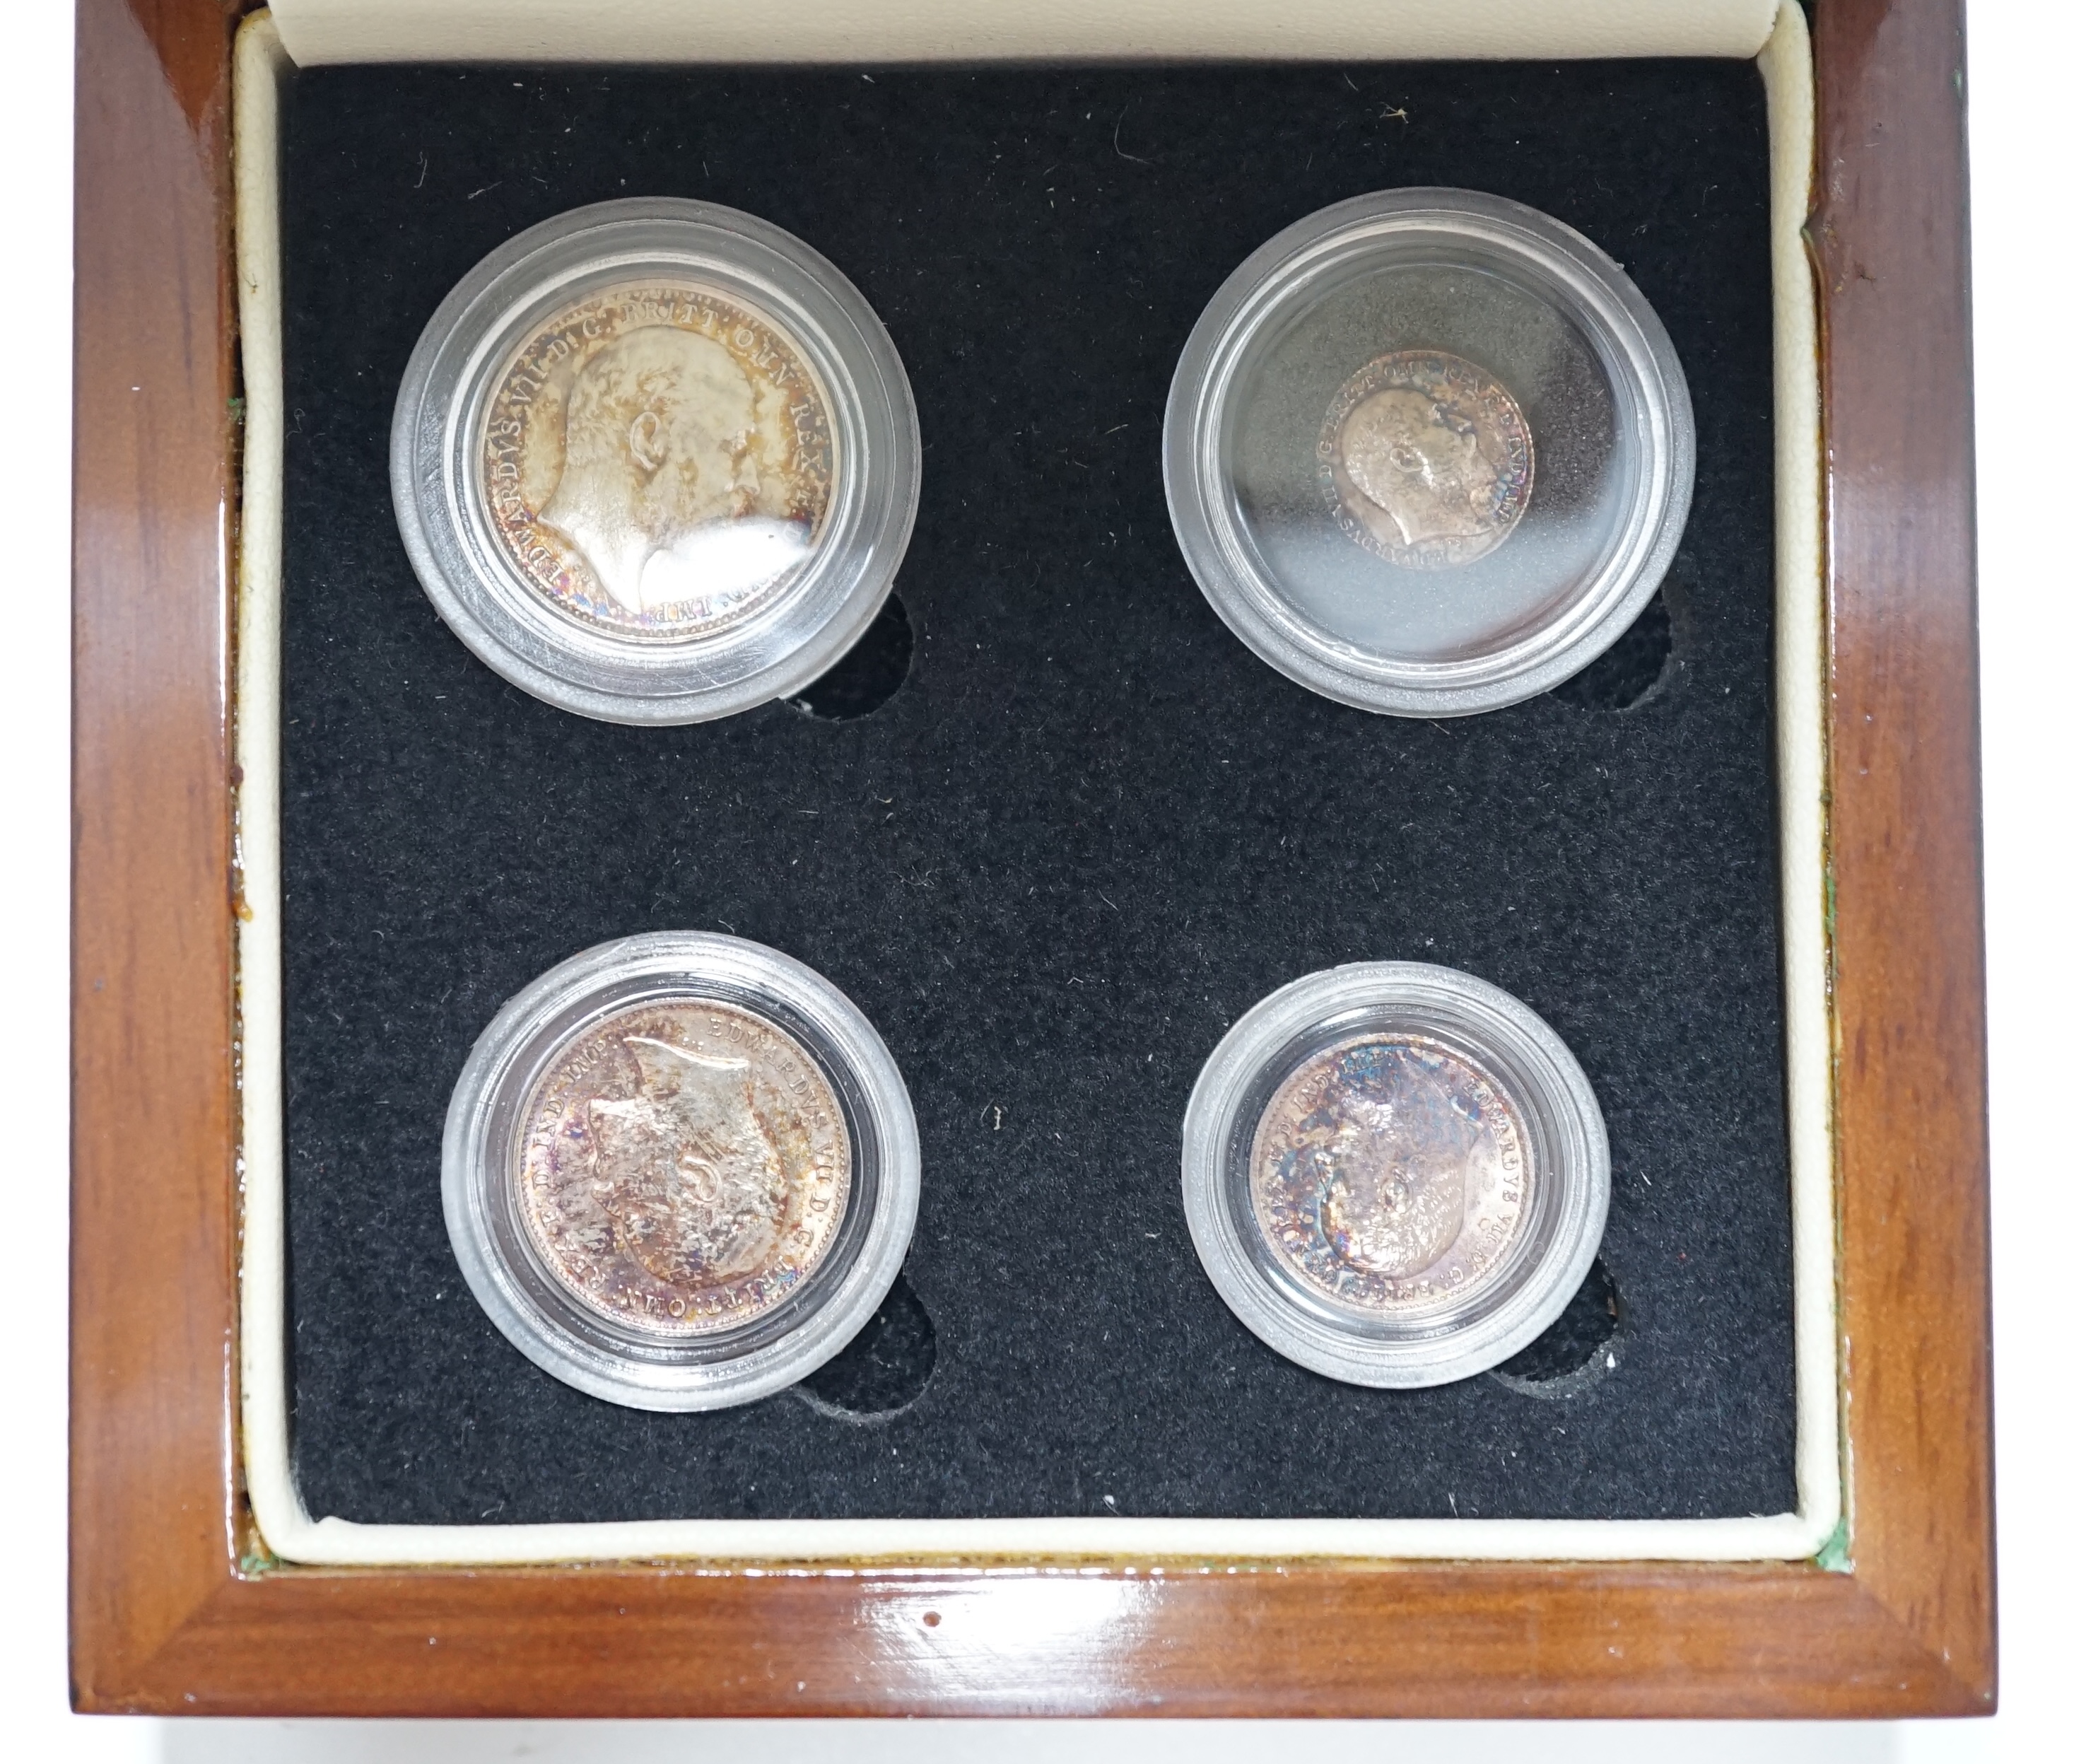 British silver coins, Edward VII four coin set of Maundy coins, 1904, toned UNC, in London mint case